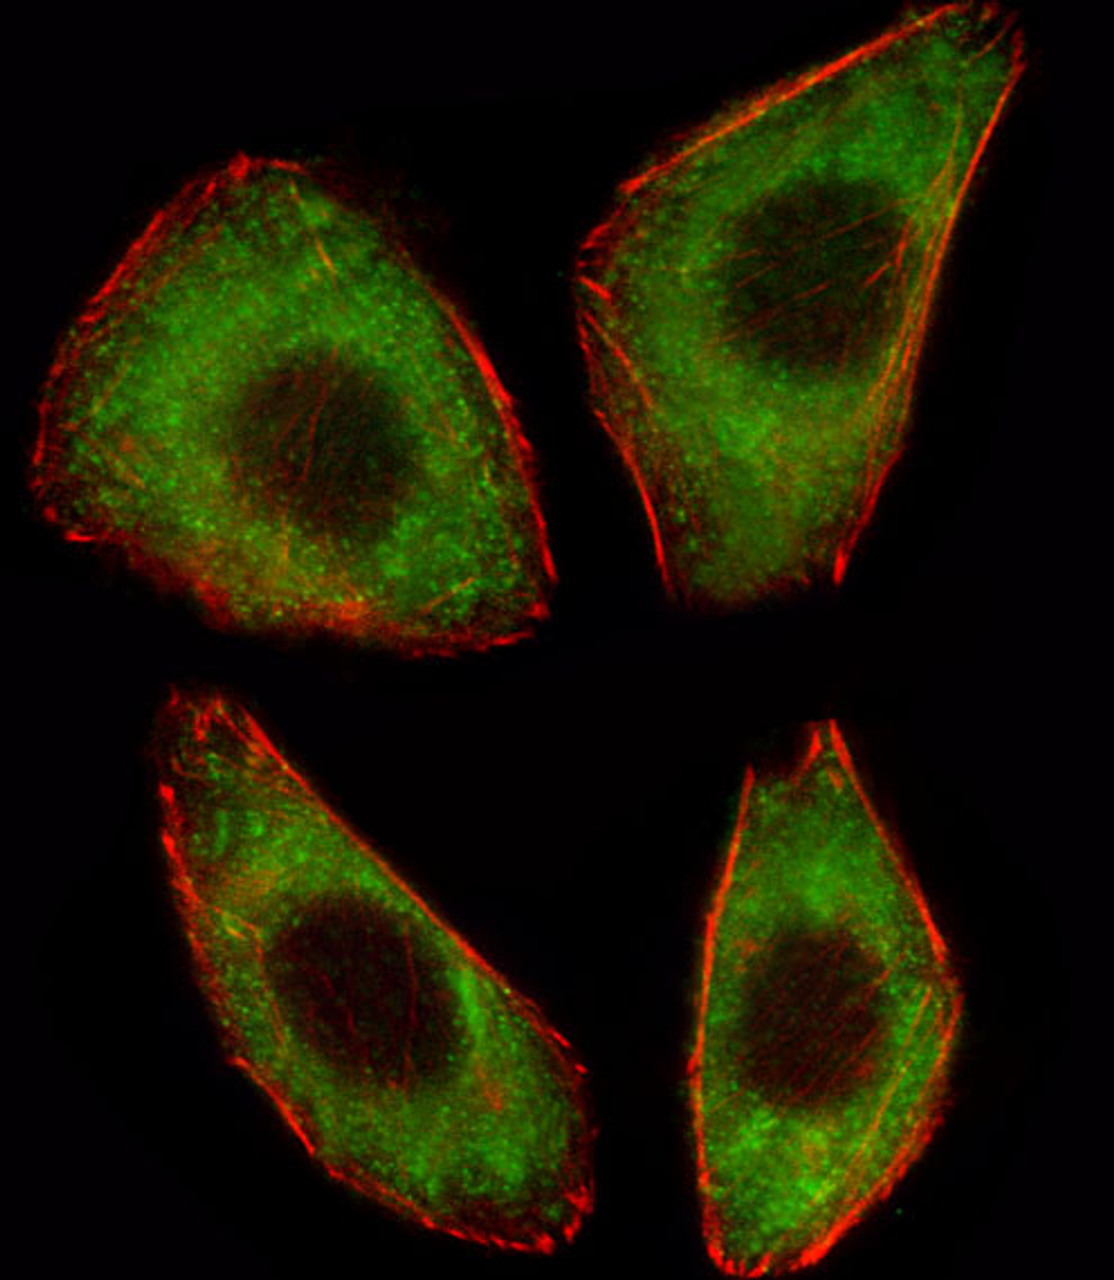 Fluorescent image of A549 cell stained with TCF25 Antibody (N-term) .A549 cells were fixed with 4% PFA (20 min) , permeabilized with Triton X-100 (0.1%, 10 min) , then incubated with TCF25 primary antibody (1:25) . For secondary antibody, Alexa Fluor 488 conjugated donkey anti-rabbit antibody (green) was used (1:400) .Cytoplasmic actin was counterstained with Alexa Fluor 555 (red) conjugated Phalloidin (7units/ml) .TCF25 immunoreactivity is localized to Cytoplasm significantly.